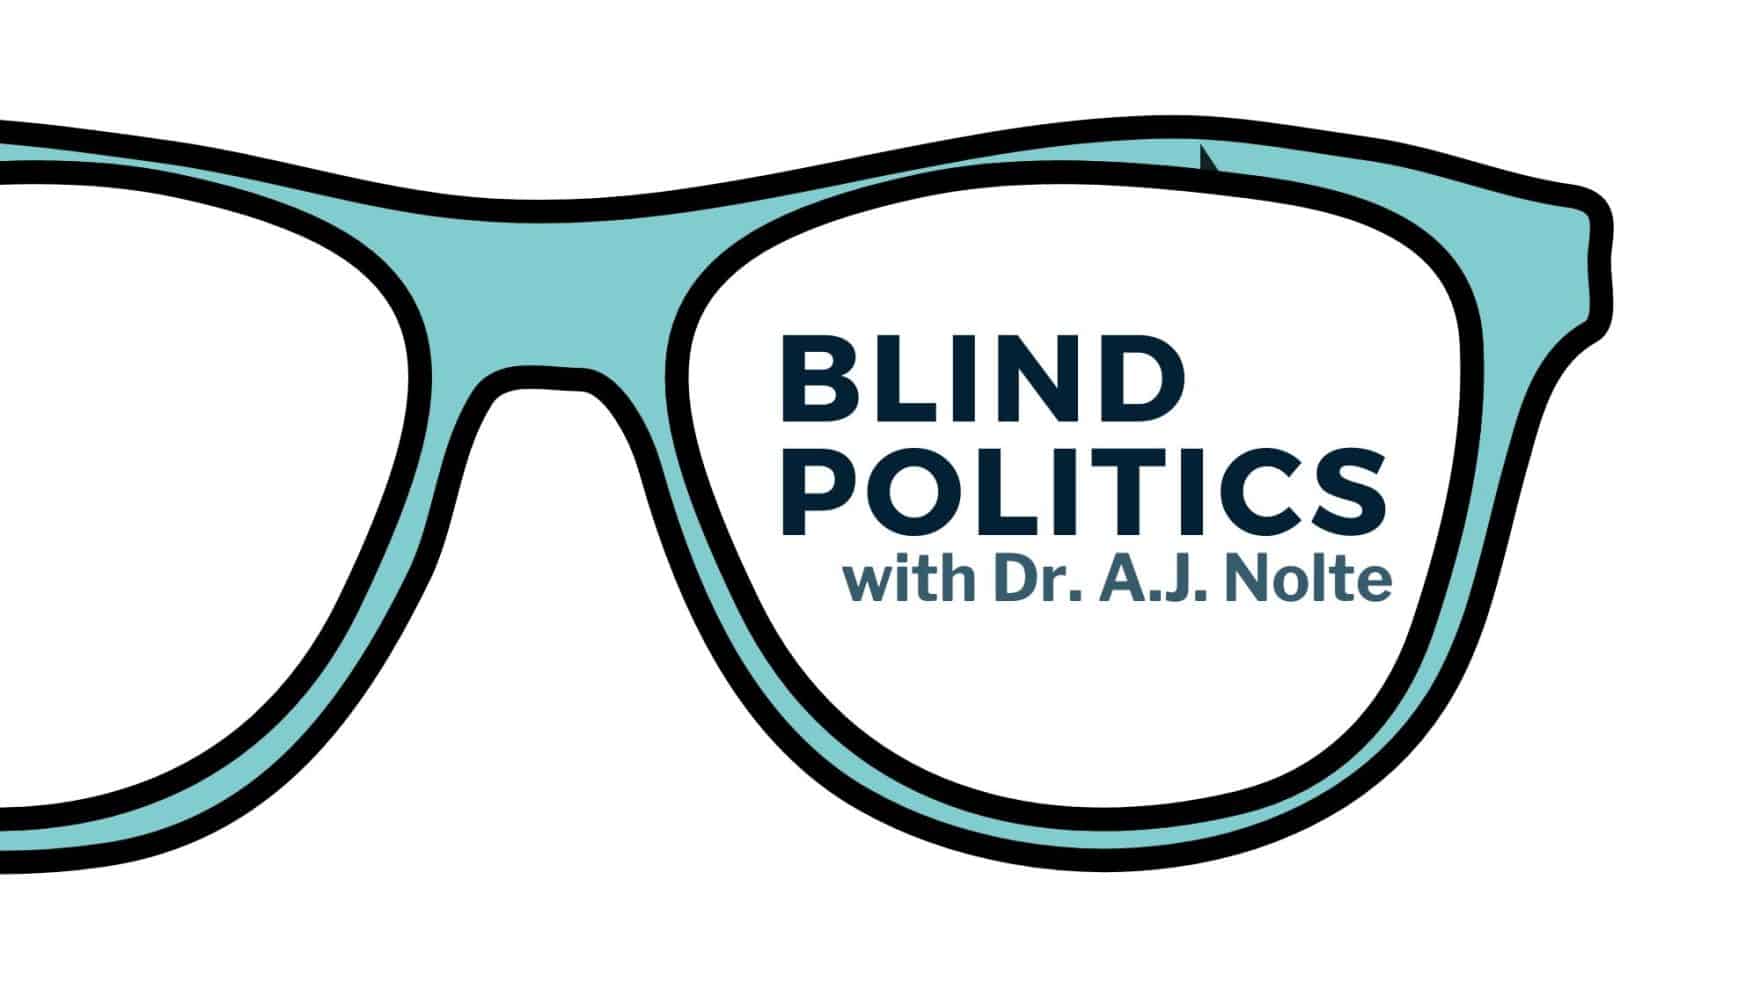 Blind politics with Dr. A.J. Nolte of Regent University's Robertson School of Government.